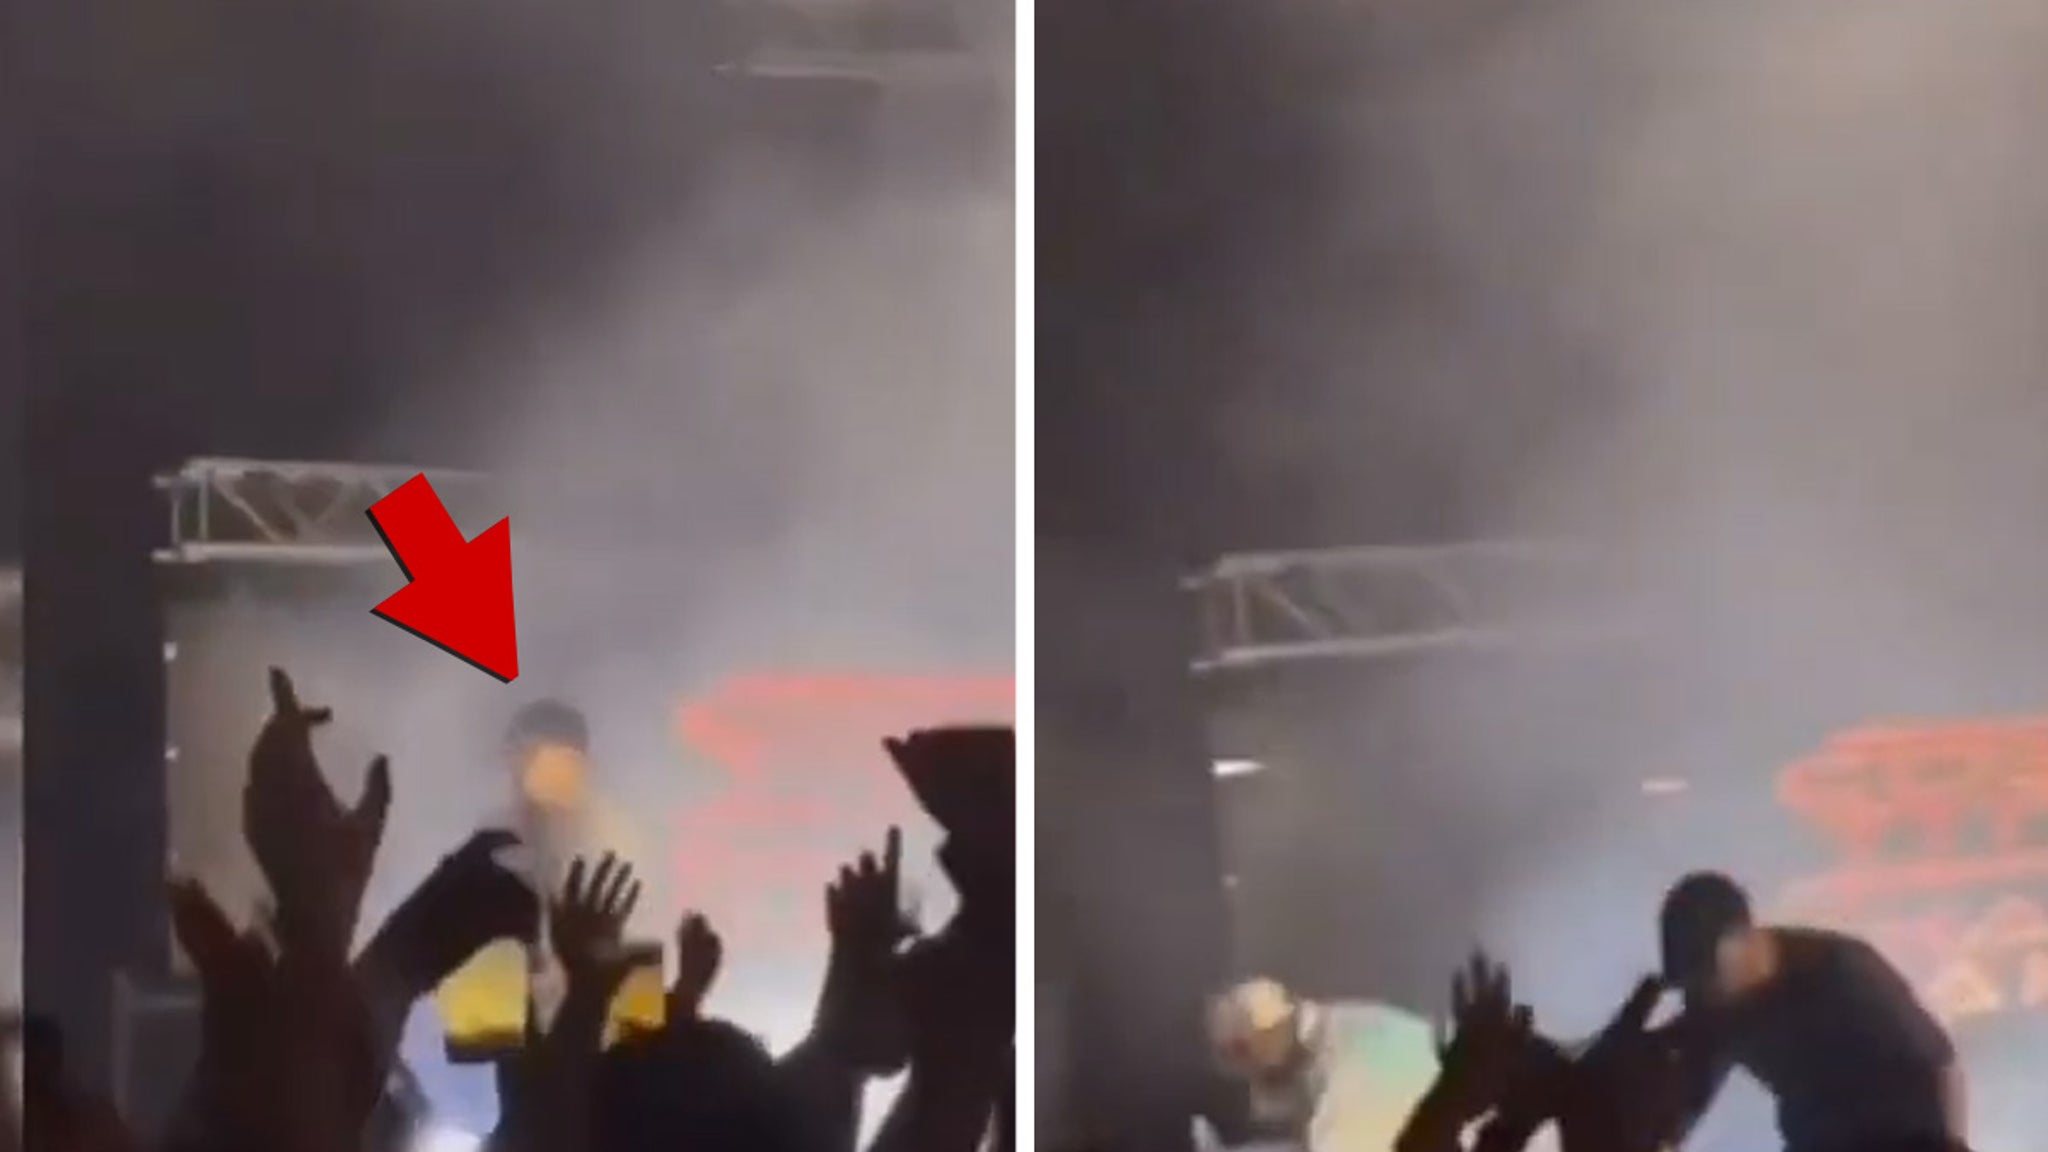 The video shows rapper Costa Titch collapsing on stage before his death